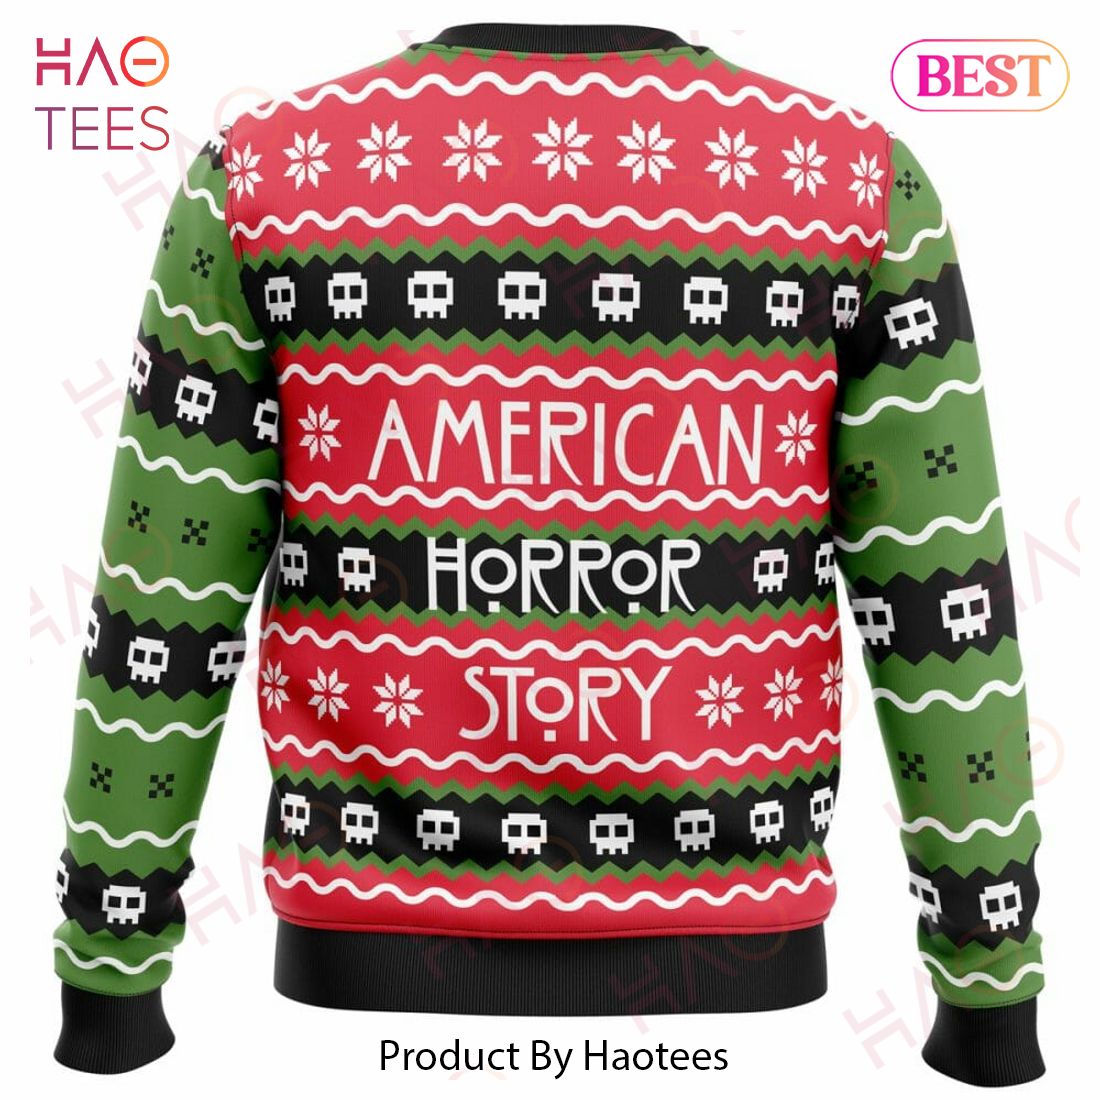 Normal Sweaters Scare Me American Horror Story Ugly Christmas Sweater